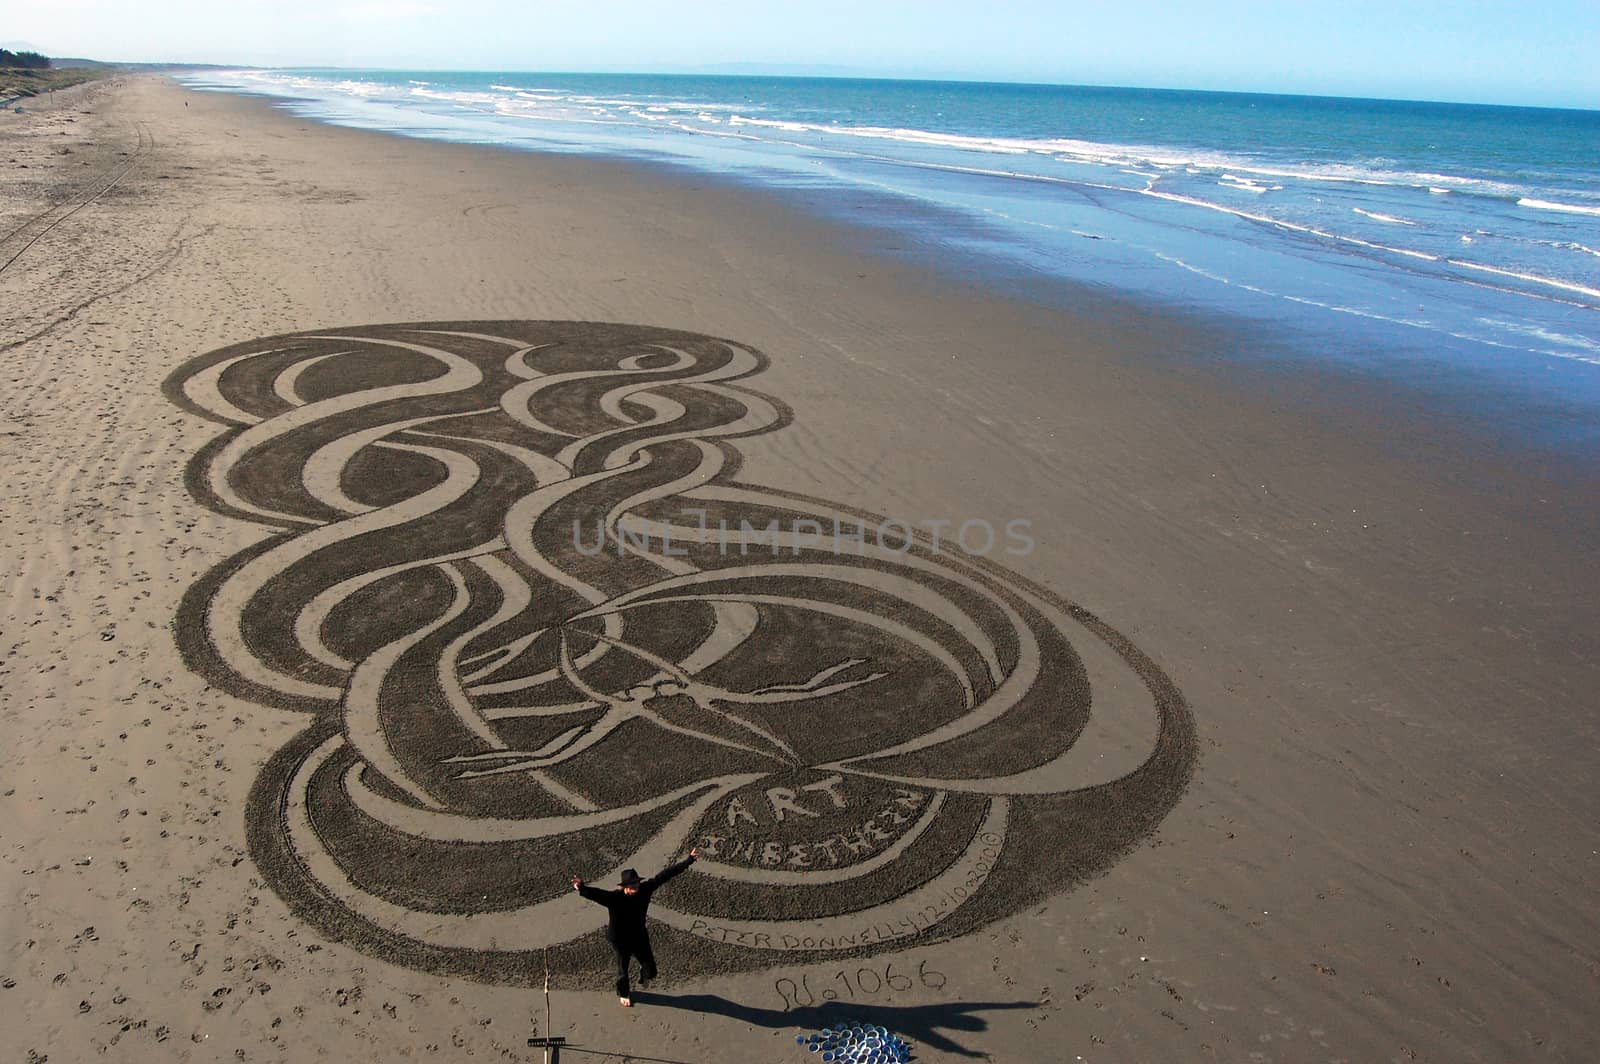 Man with sand picture at town beach, Christchurch, New Zealand